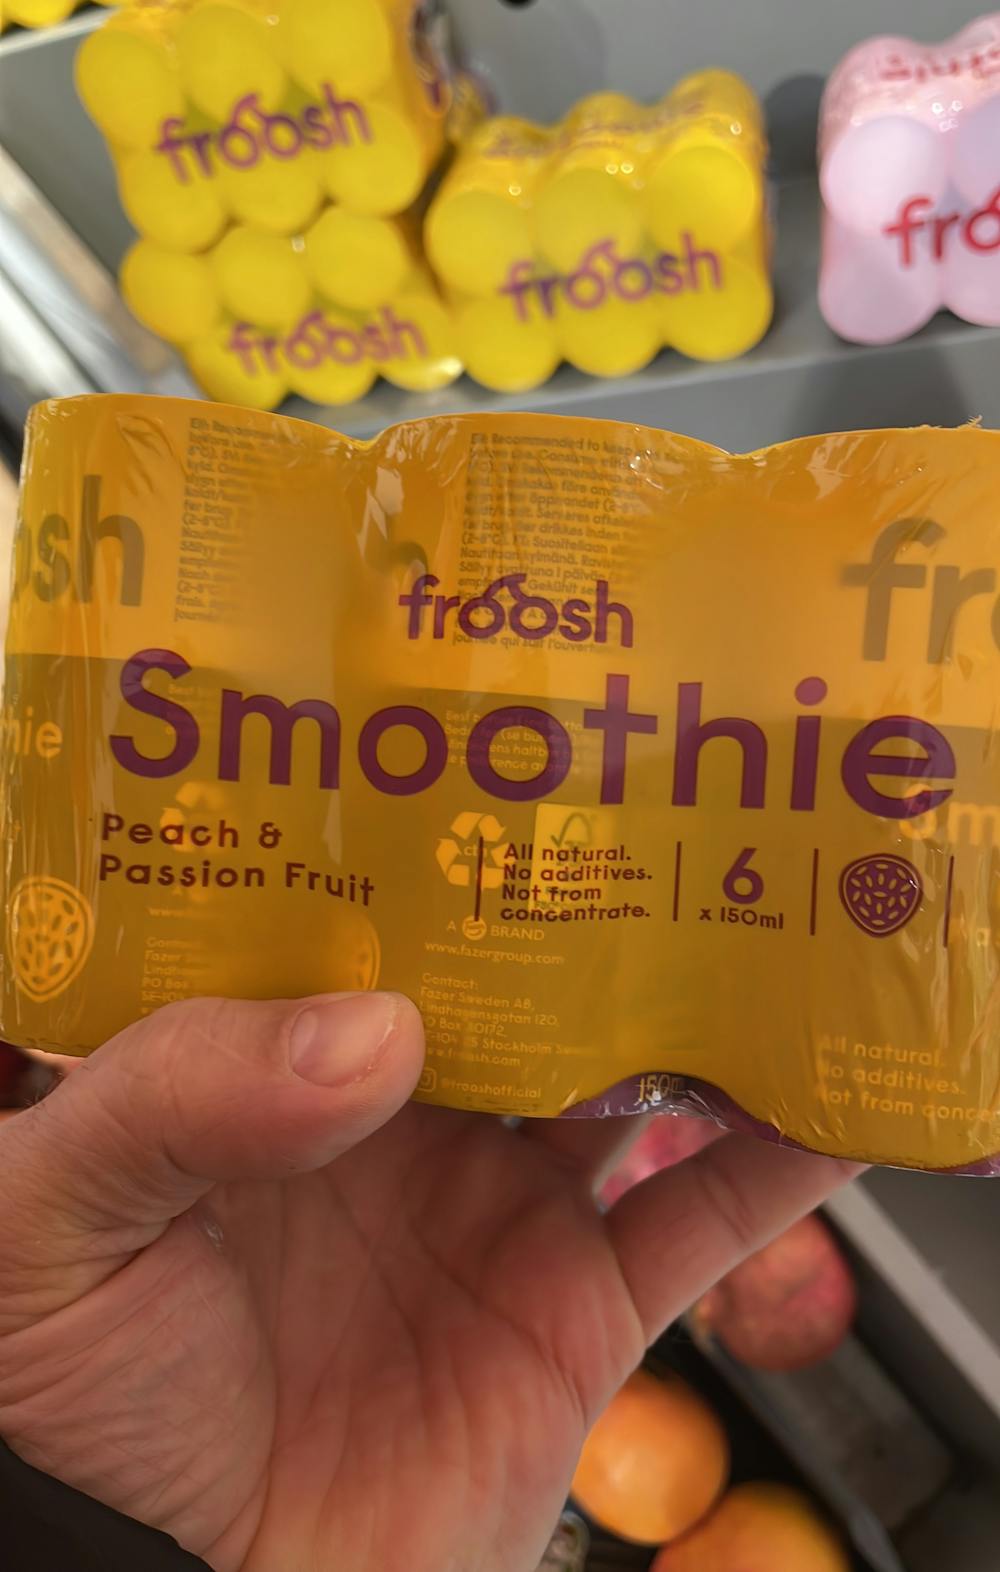 Smoothie, Froosh